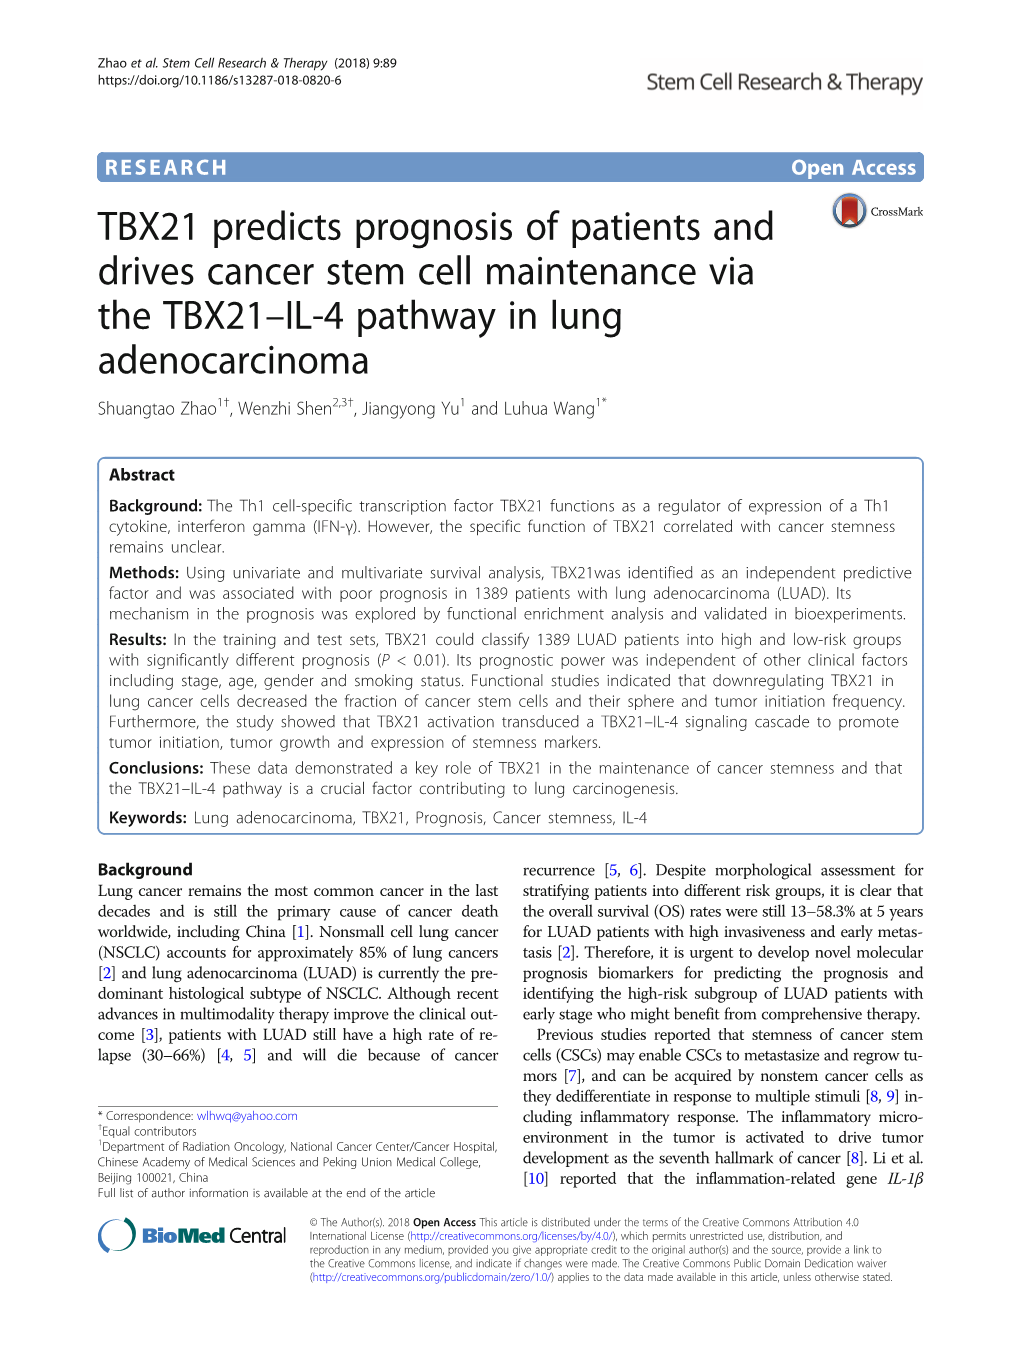 TBX21 Predicts Prognosis of Patients and Drives Cancer Stem Cell